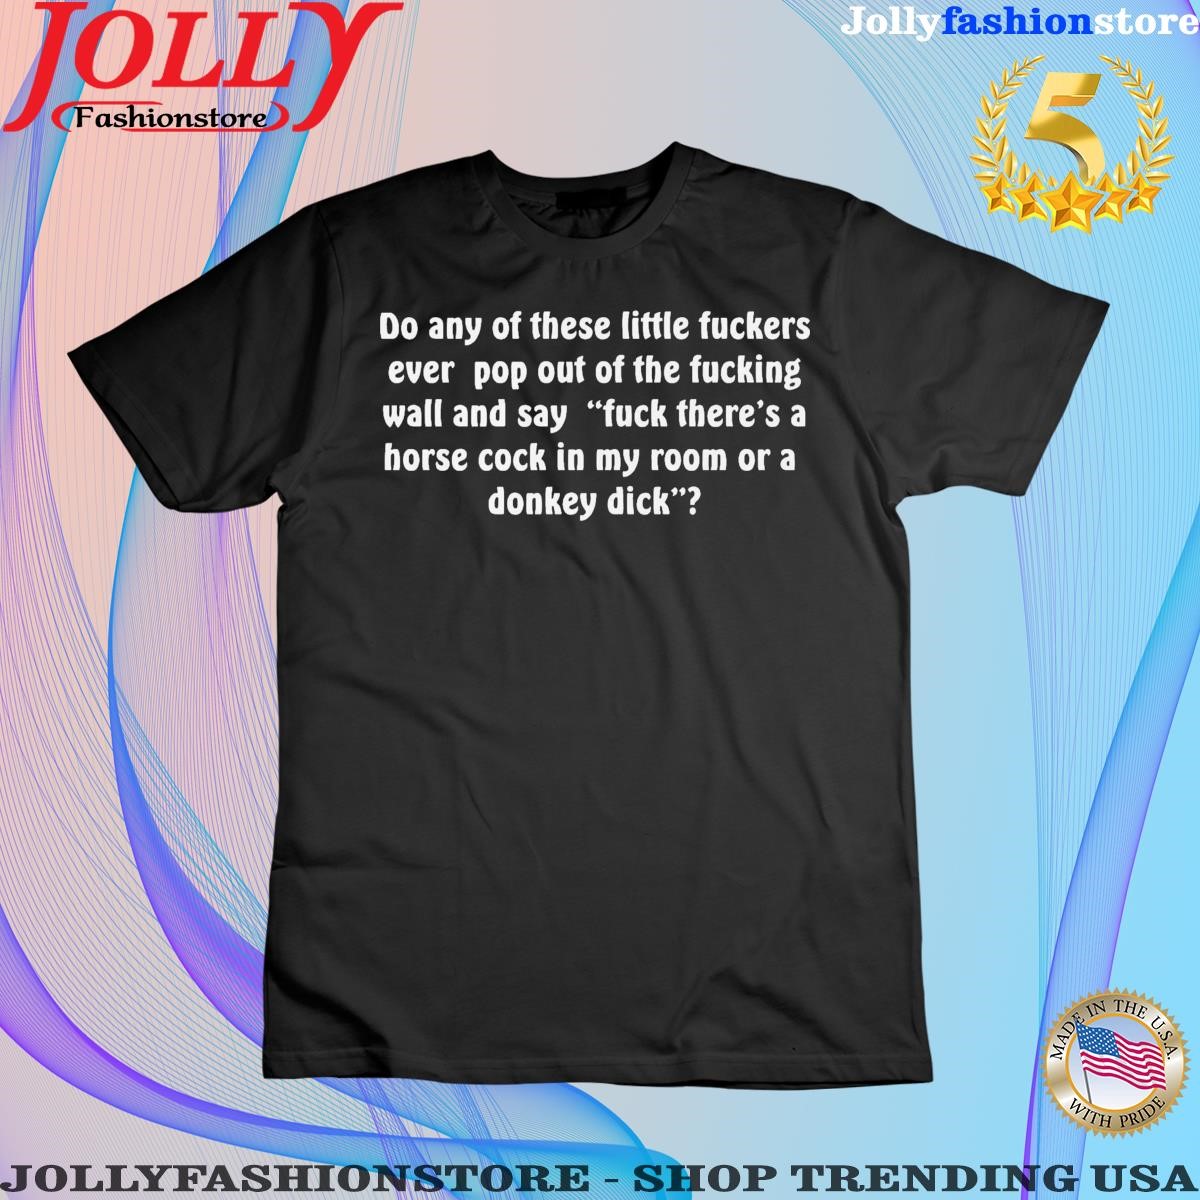 Do any of these little fuckers shirt women tee shirt.png